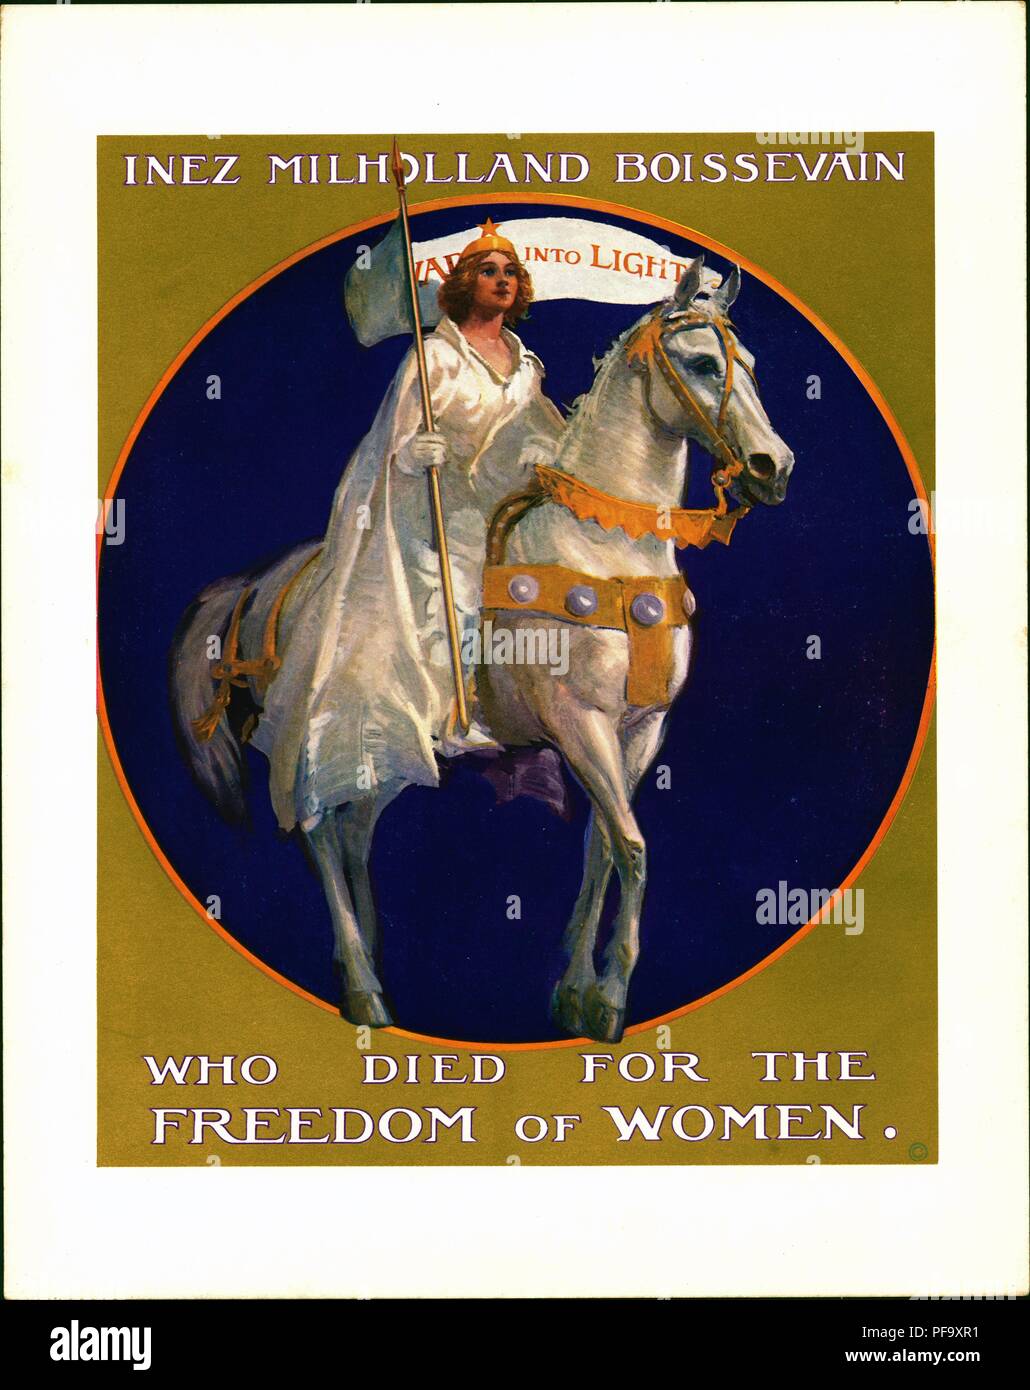 White, purple, and gold cardboard poster reproducing a painting (currently on display in Washington DC's Sewall-Belmont House) of suffragist Inez Milholland Boissevain, who died while campaigning for the cause in the American West, Inez is depicted in the guise of a martyr, wearing a white dress and cloak and holding a pennant, while riding on a white horse, with the text 'Inez Milholland Boissevain' above and 'who died for the freedom of women' below, produced for the American market, 1916. () Stock Photo